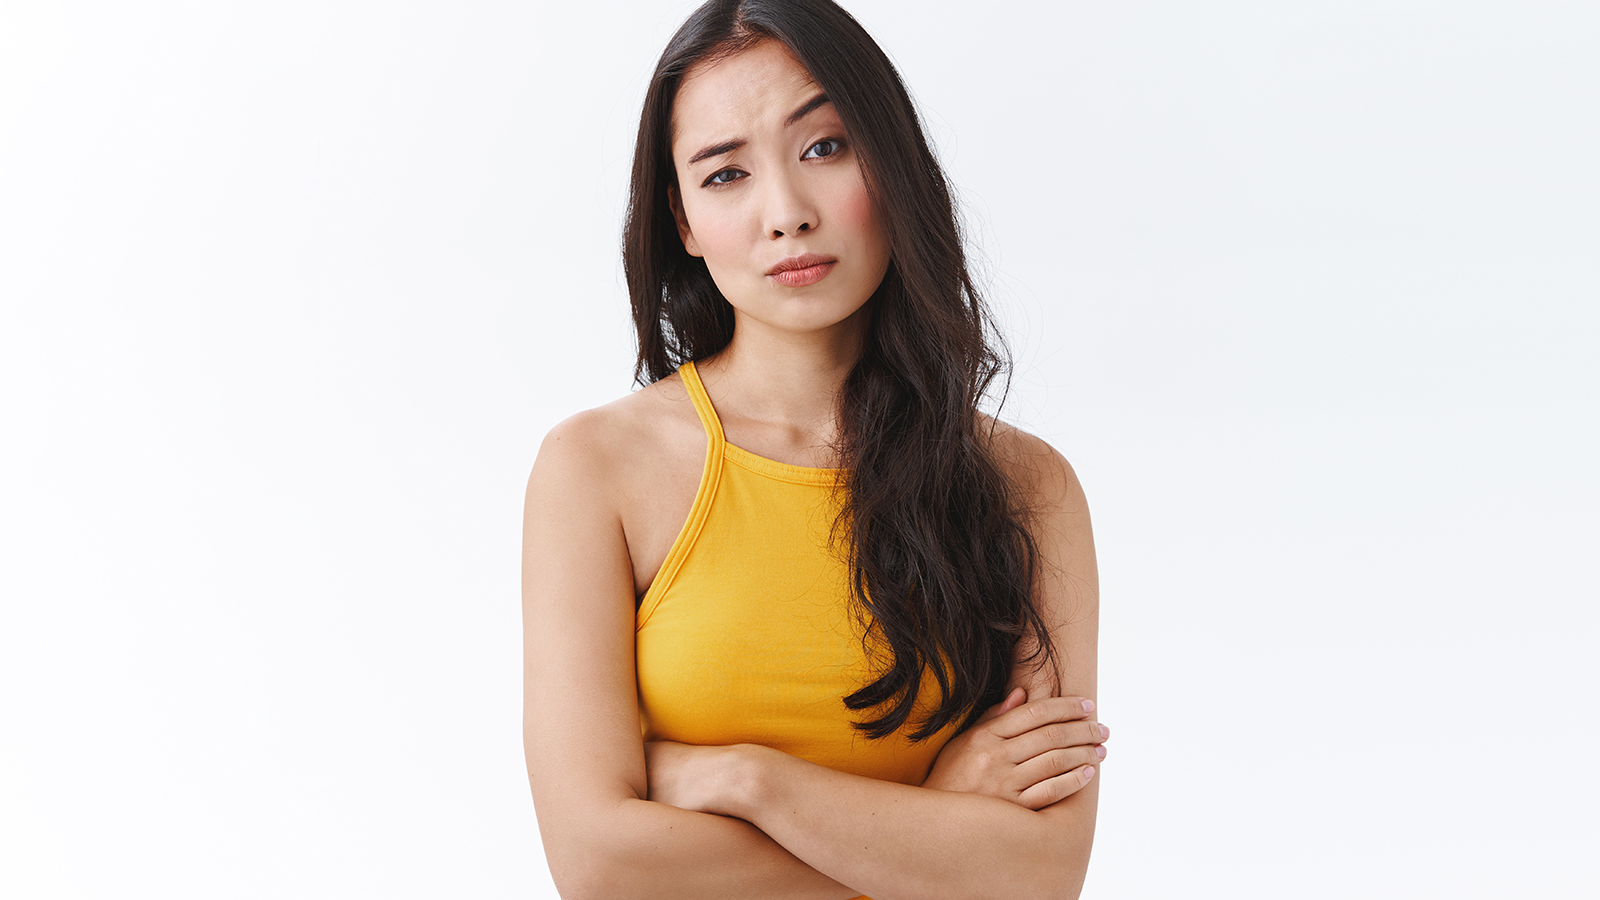 Skeptical, unimpressed pretty east-asian female in yellow top, cross hands on chest defensive and unamused pose, raise one eyebrow and stare judgemental being uninterseted and doubtful